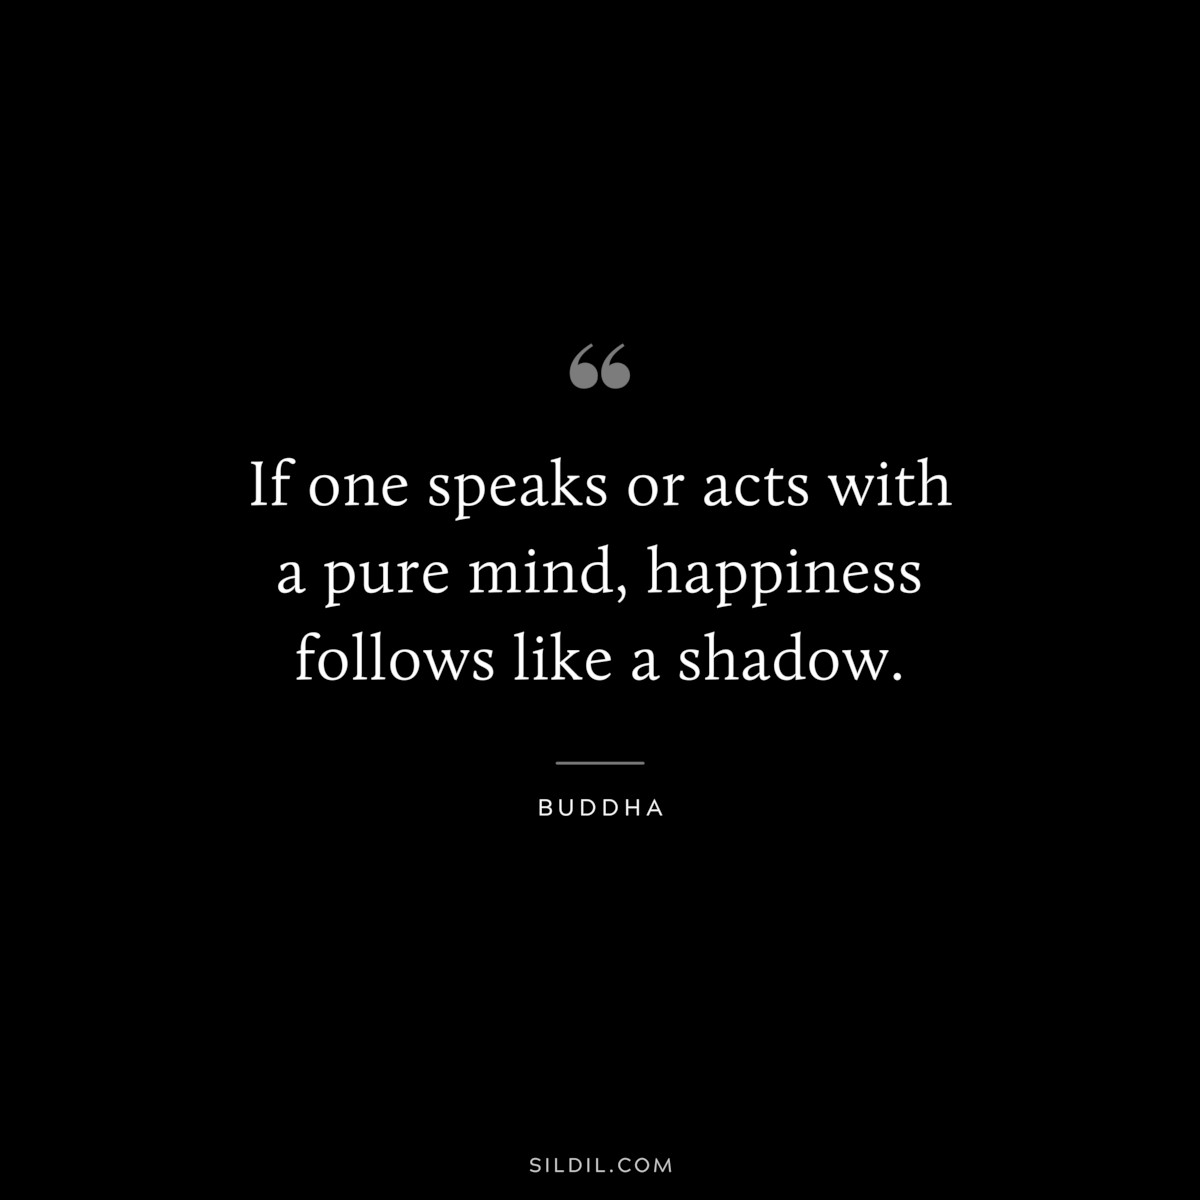 If one speaks or acts with a pure mind, happiness follows like a shadow. ― Buddha